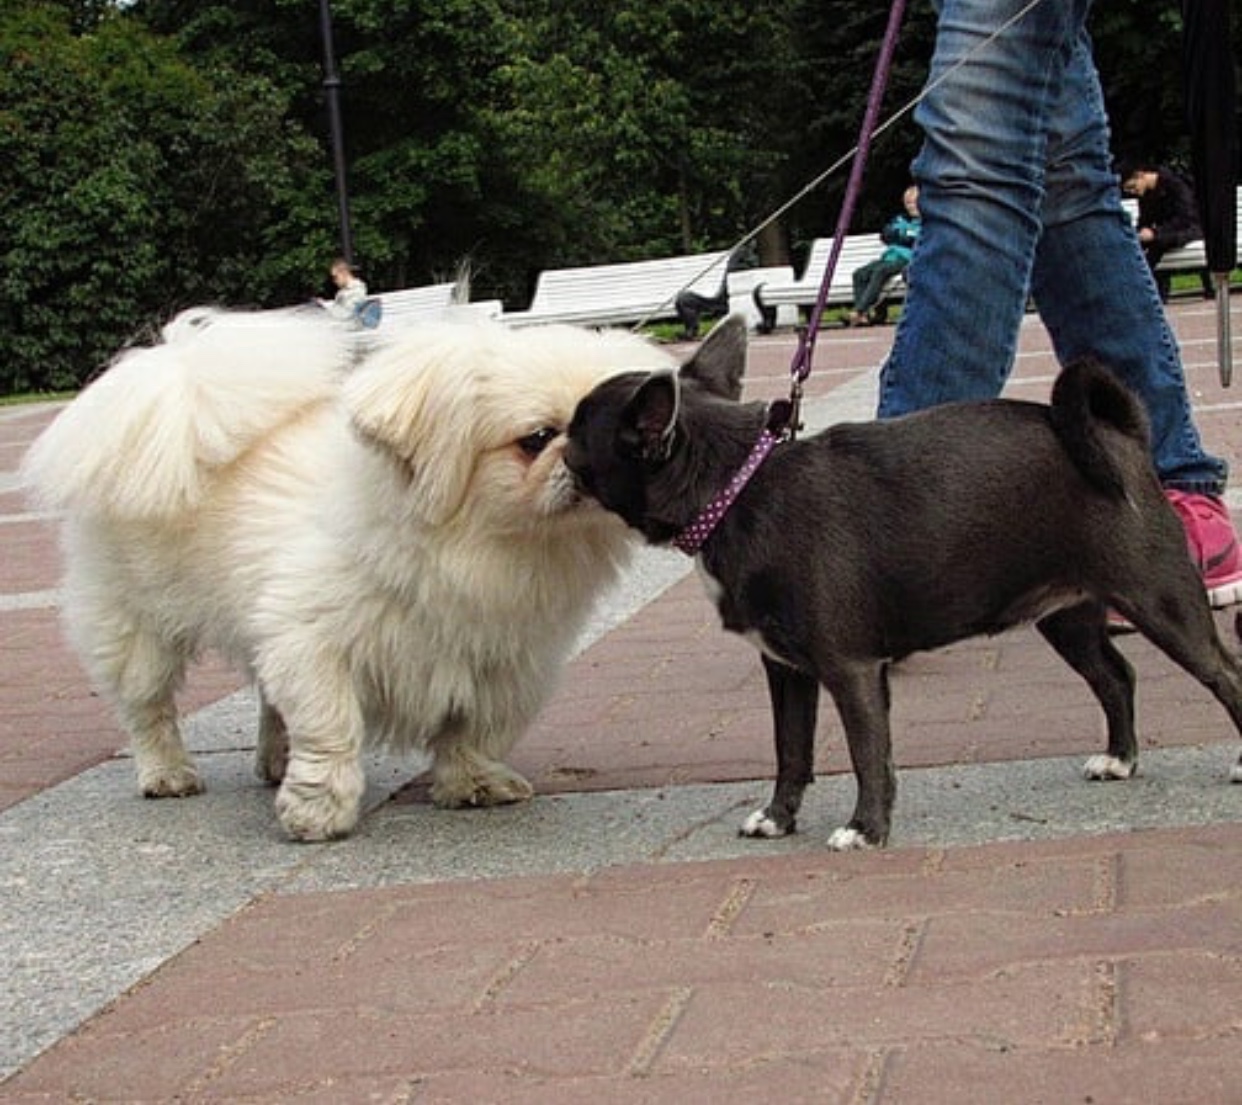 Chihuahua licking the face of a another at the park